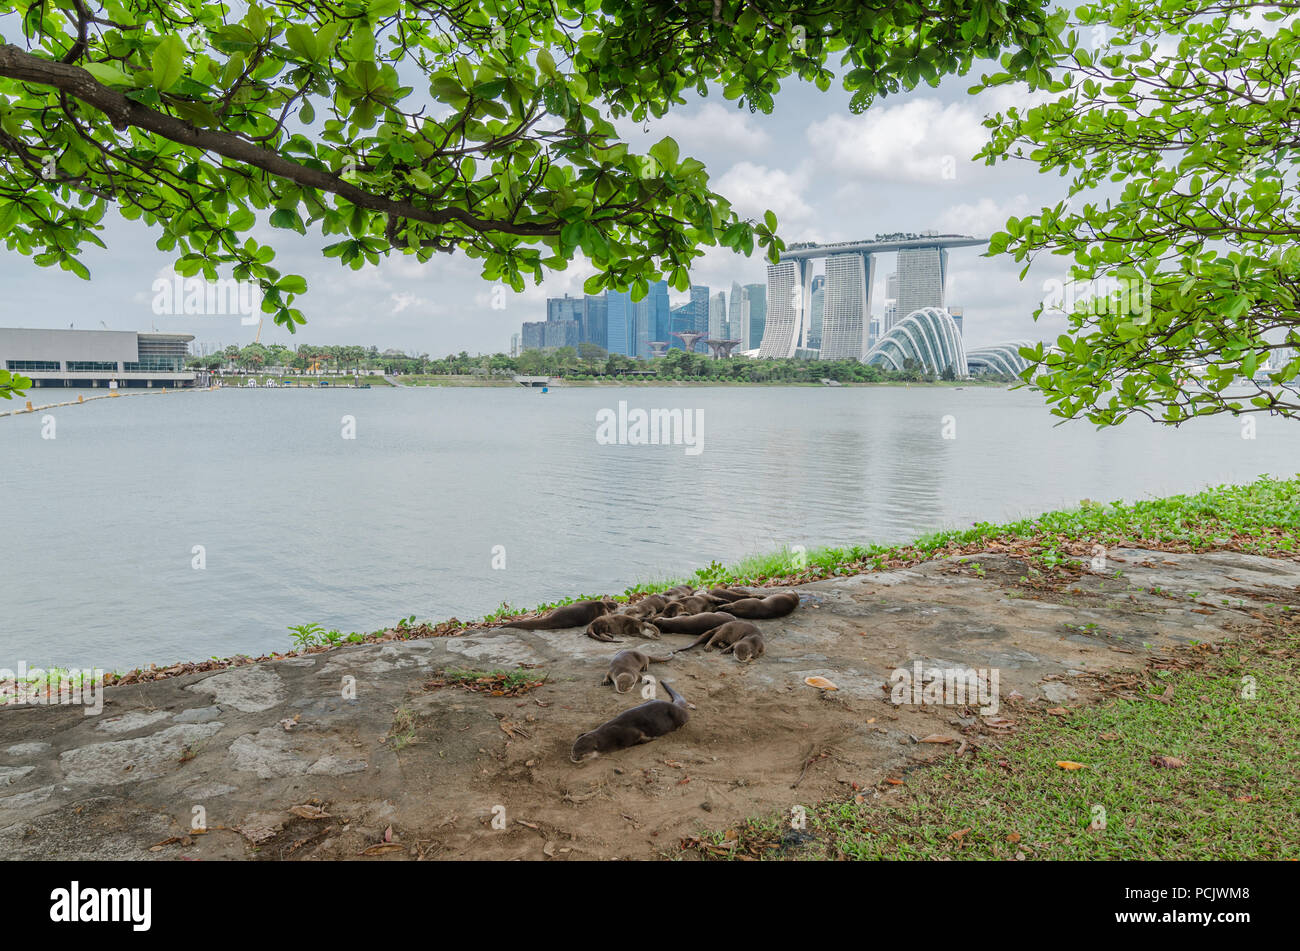 Family of otters spotted taking afternoon nap near Garden By The Bay East Garden. Otters progressively sighted in highly urbanized area. Stock Photo